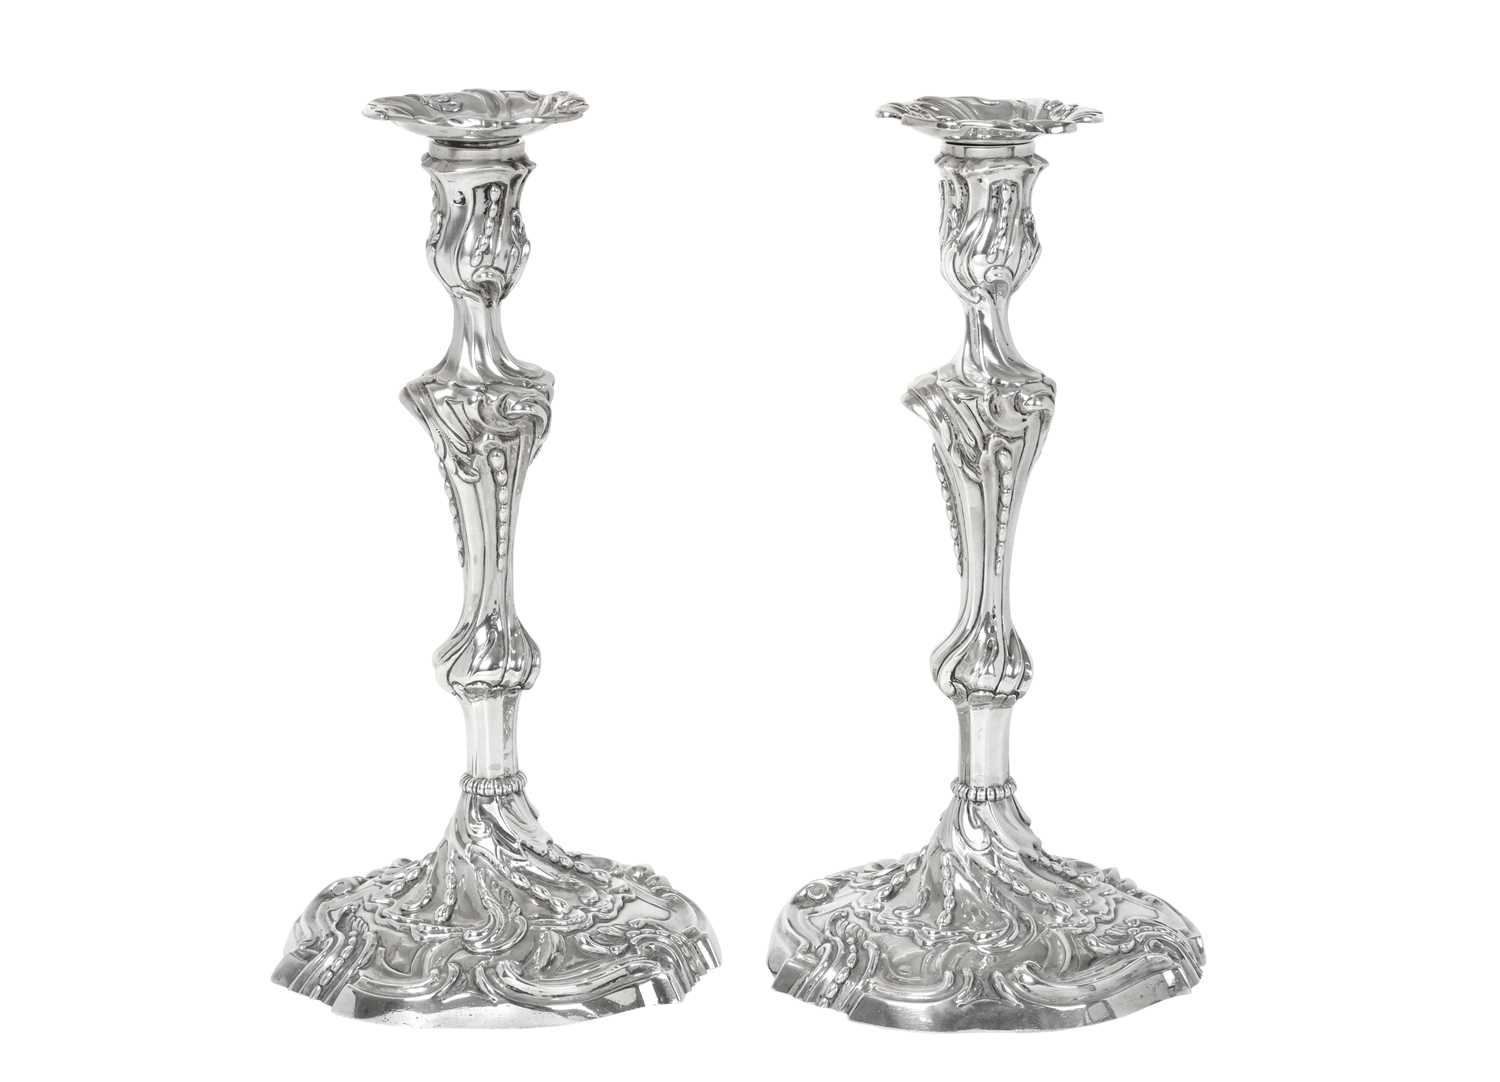 A Pair of George III Silver Candlesticks, Probably by John Carter, London, 1768